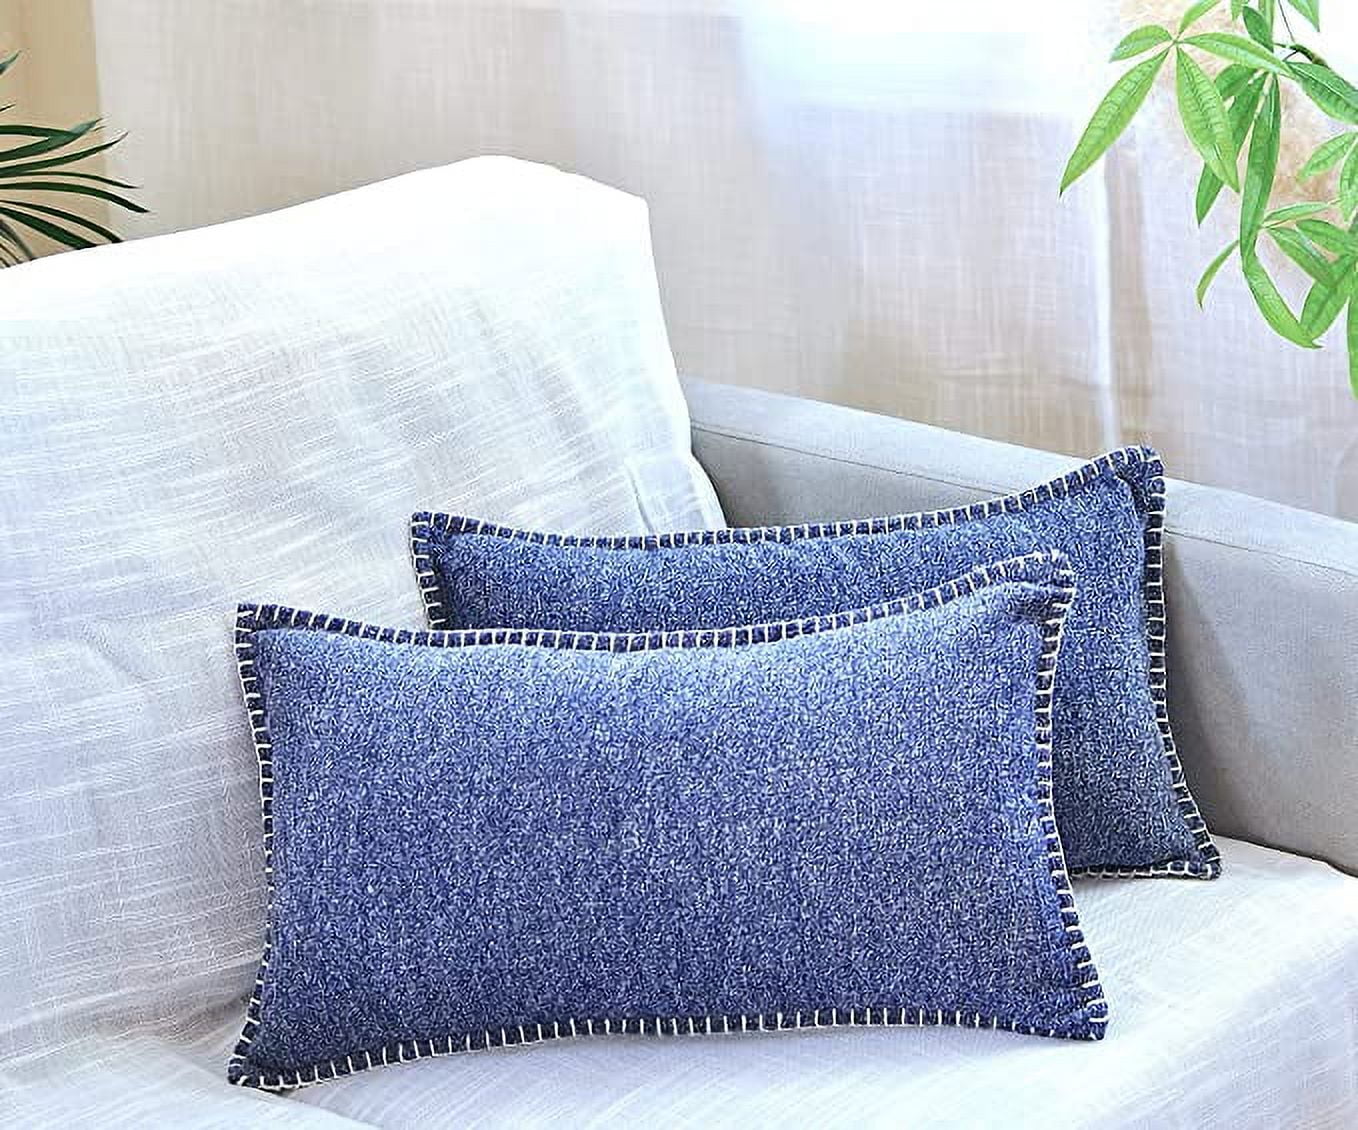 Sanmetexr Be Our Guest Decorative Lumbar Pillow Covers 12x20 Inches, Decor  Soft Embroidered Accent Pillow Case for Bed, Bedroom, Guestroom. (Color